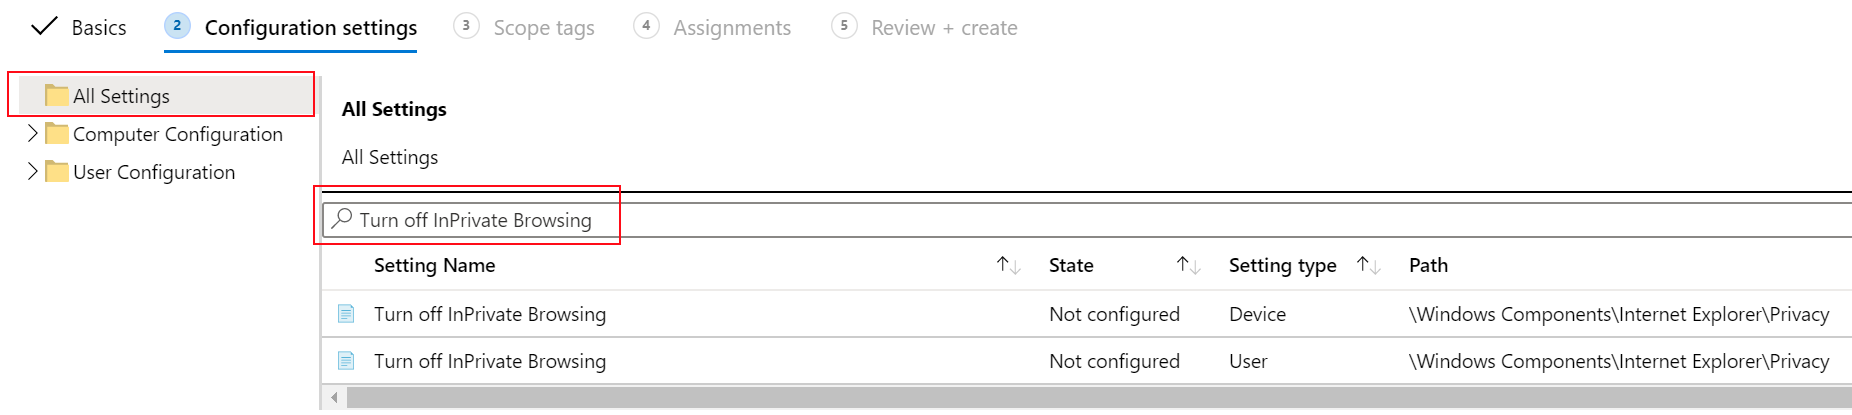 Turn off InPrivate Browsing device policy in administrative template in Microsoft Intune